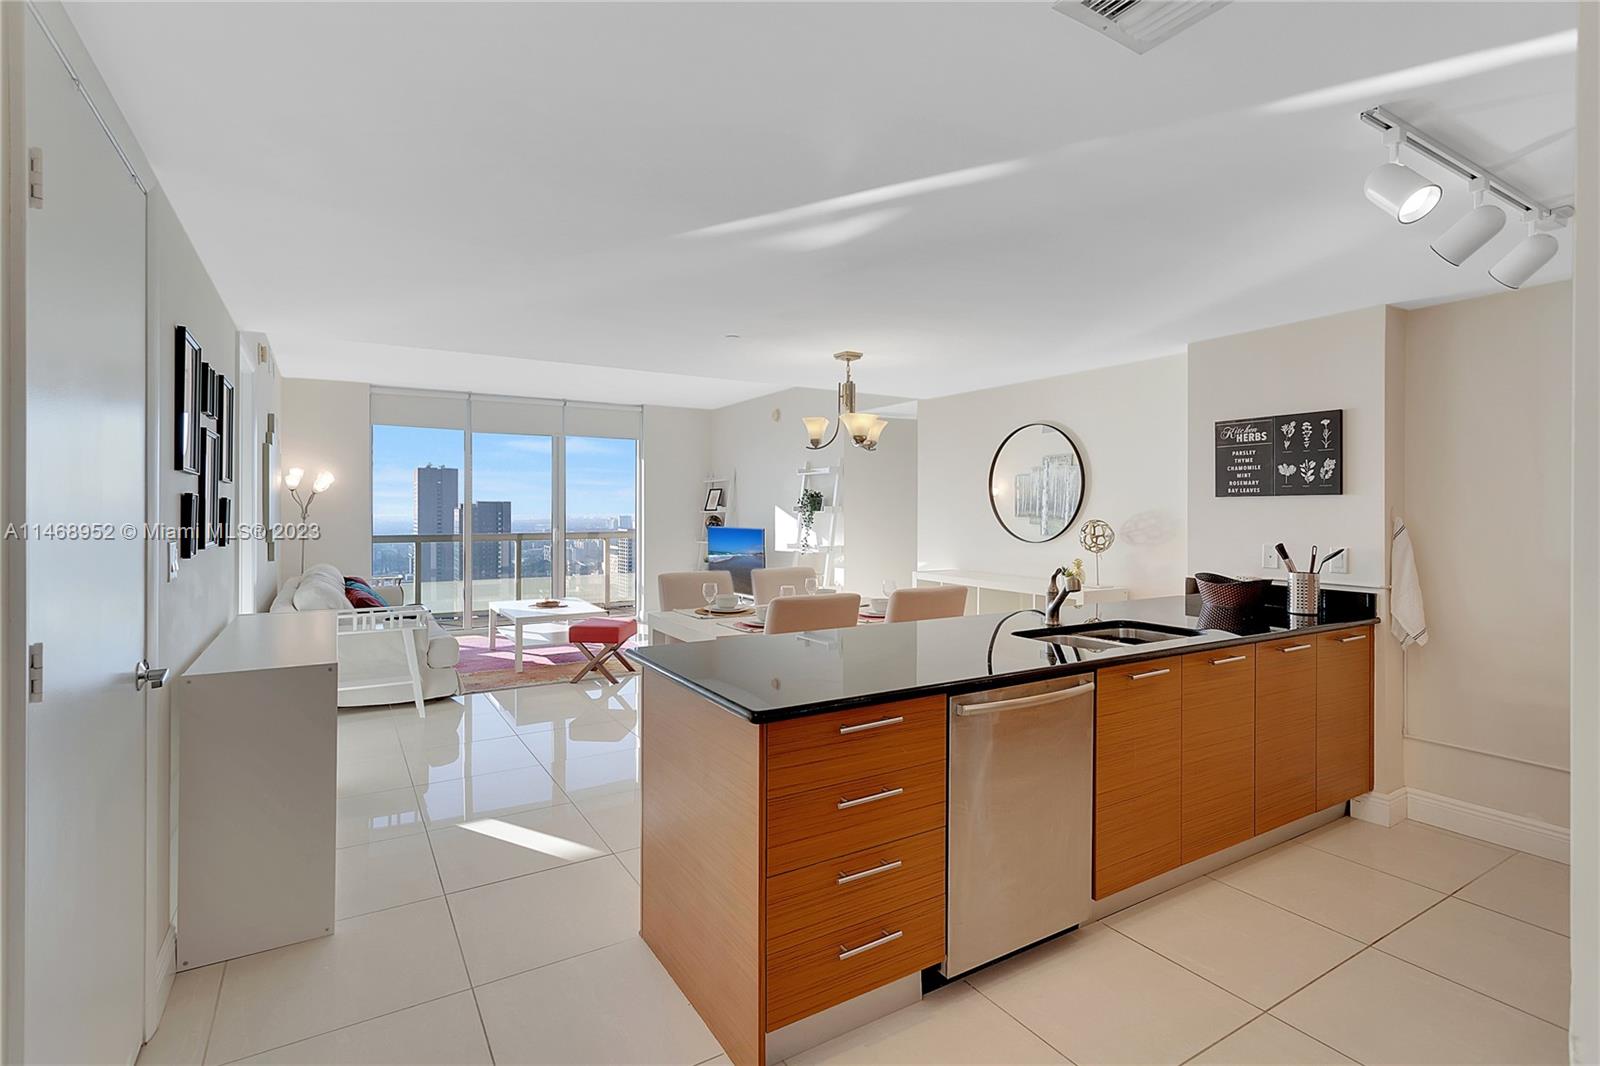 Step into luxury on the 38th floor of 50 Biscayne. This 2 bed, 2-bath condo offers breathtaking panoramic views from every window. The open living space is drenched in natural light ,, and the modern kitchen is a chef's dream. Both bedrooms have en-suite and primary suite is a private haven with balcony. Enjoy the fitness center, pool, and concierge service. you're in the heat of Downtown Miami, where culture, dining, and entertainment thrive. Elevate your lifestyle here. Schedule your private  showing today.